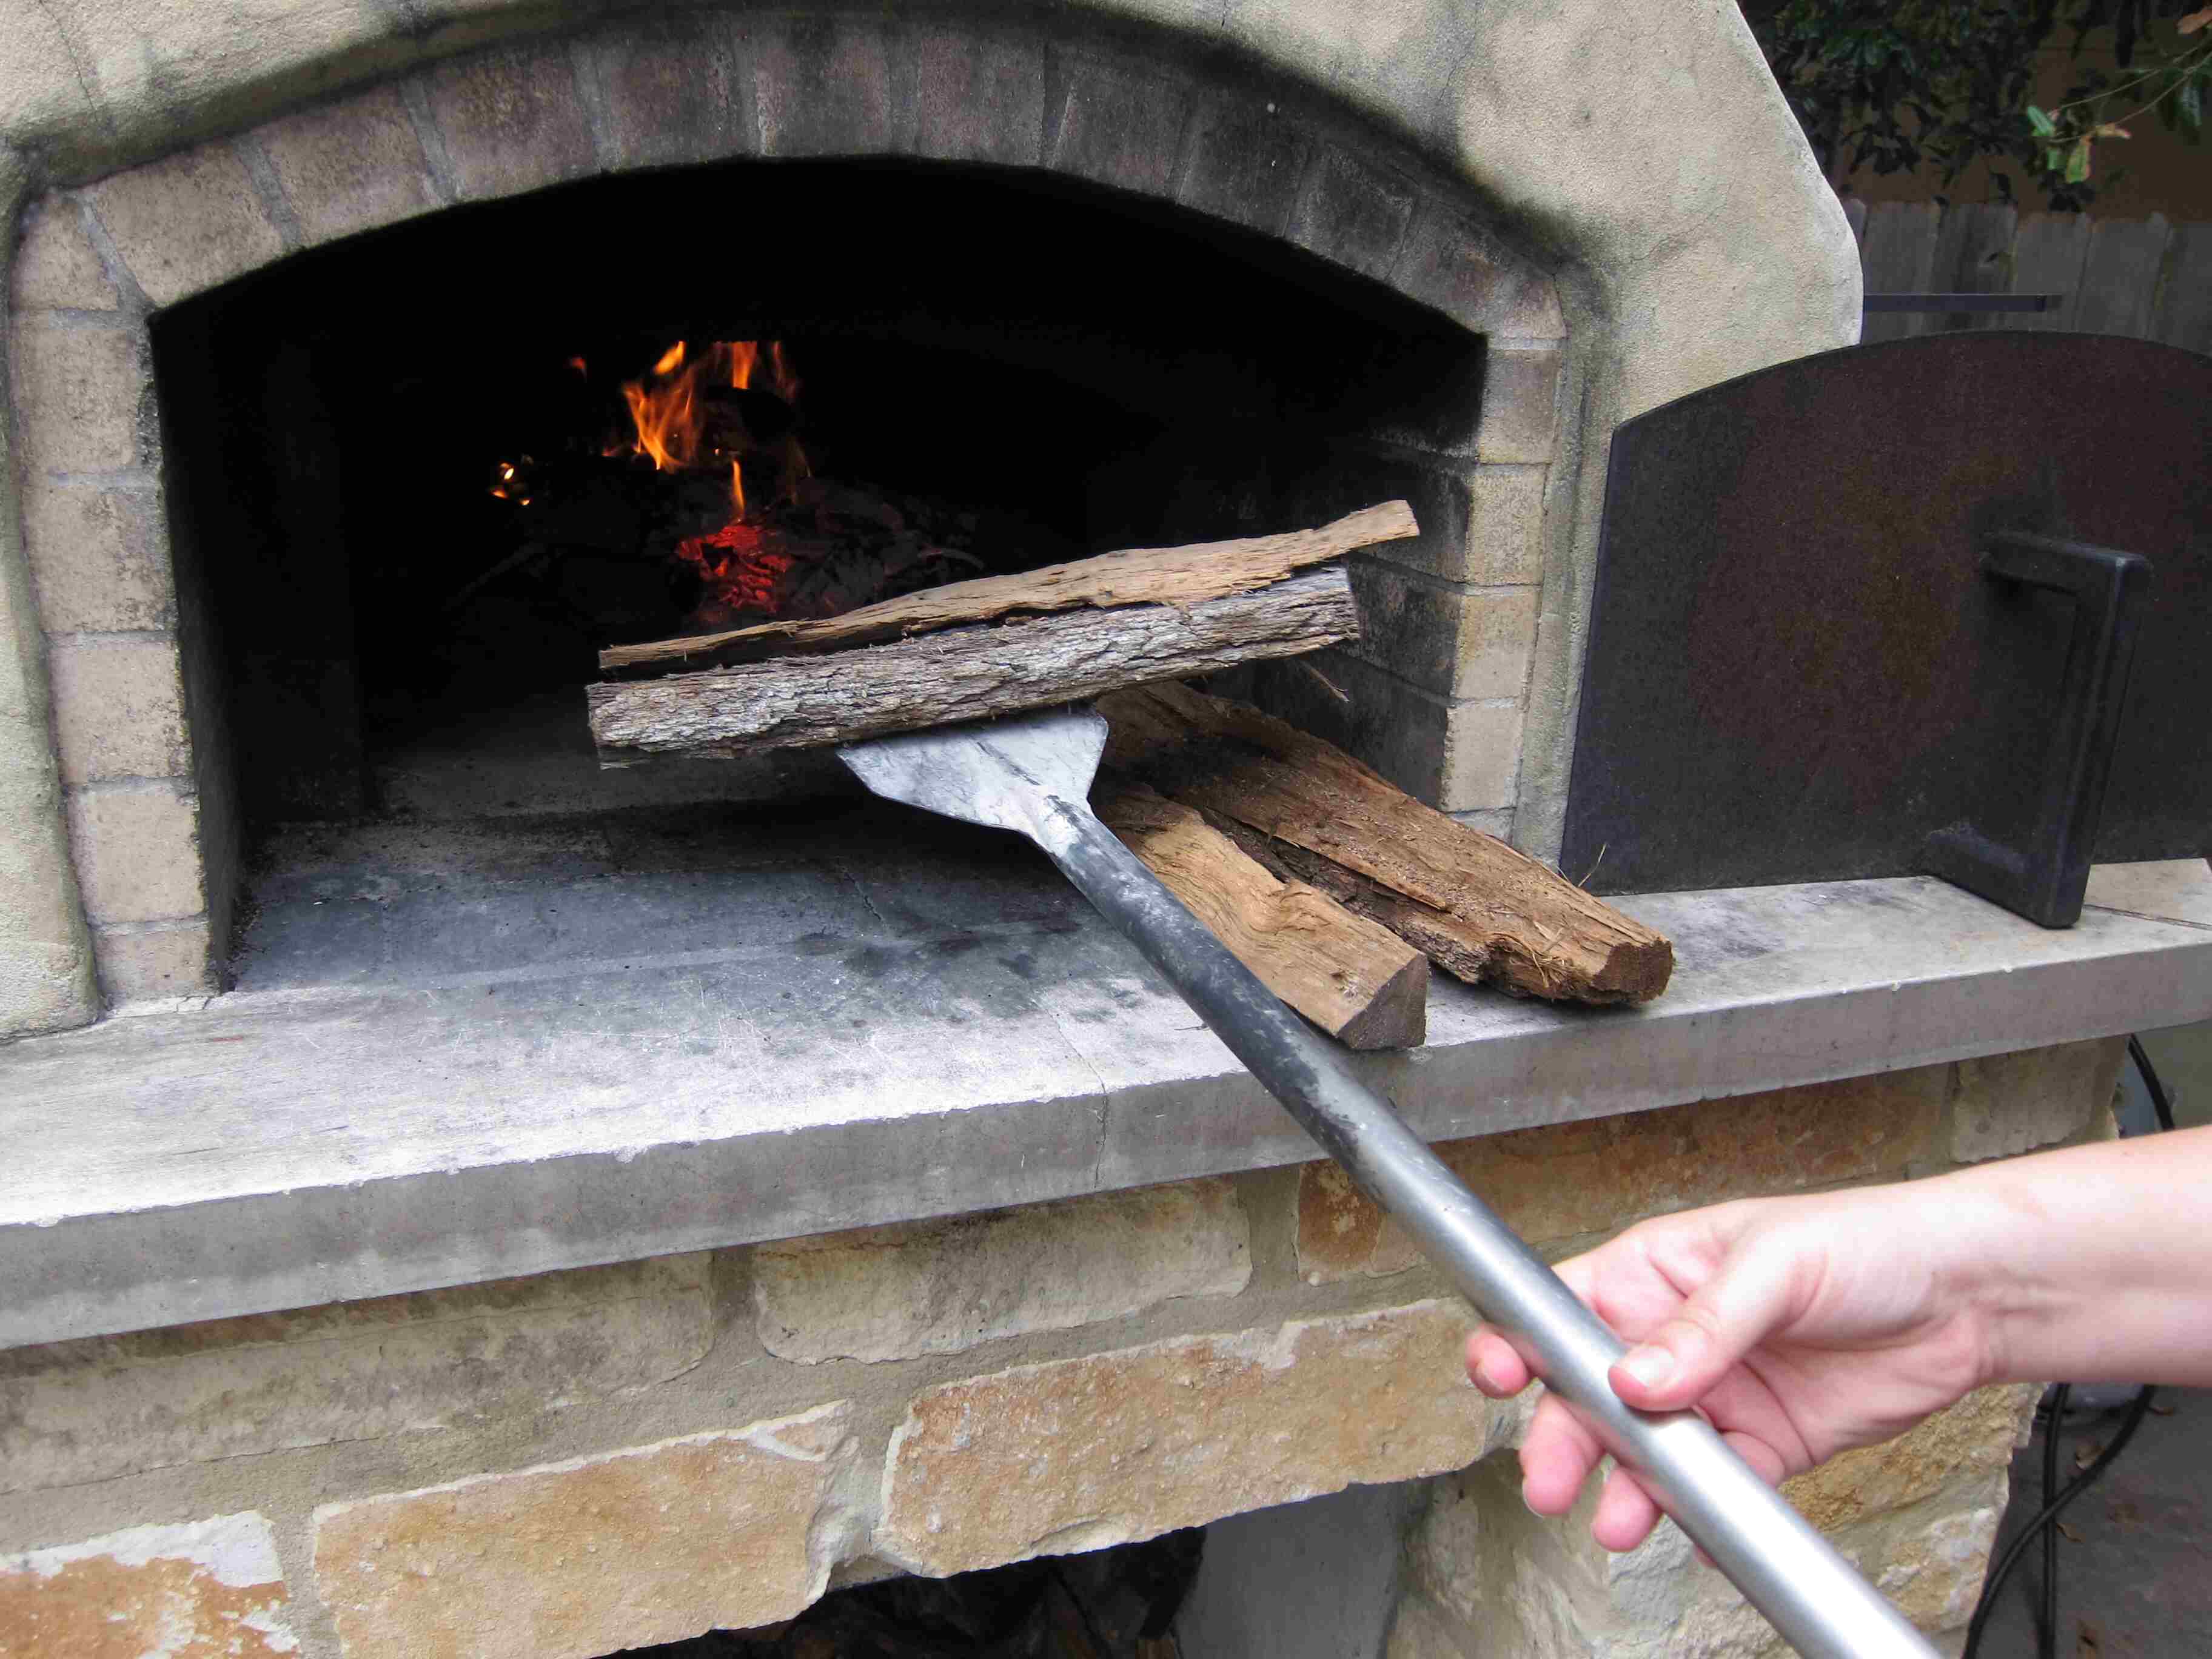  SHANGPEIXUAN Pizza Oven Brush with Brass Bristles and Scraper  41-Inch Handle Wood Fired Pizza Oven Tools : Home & Kitchen